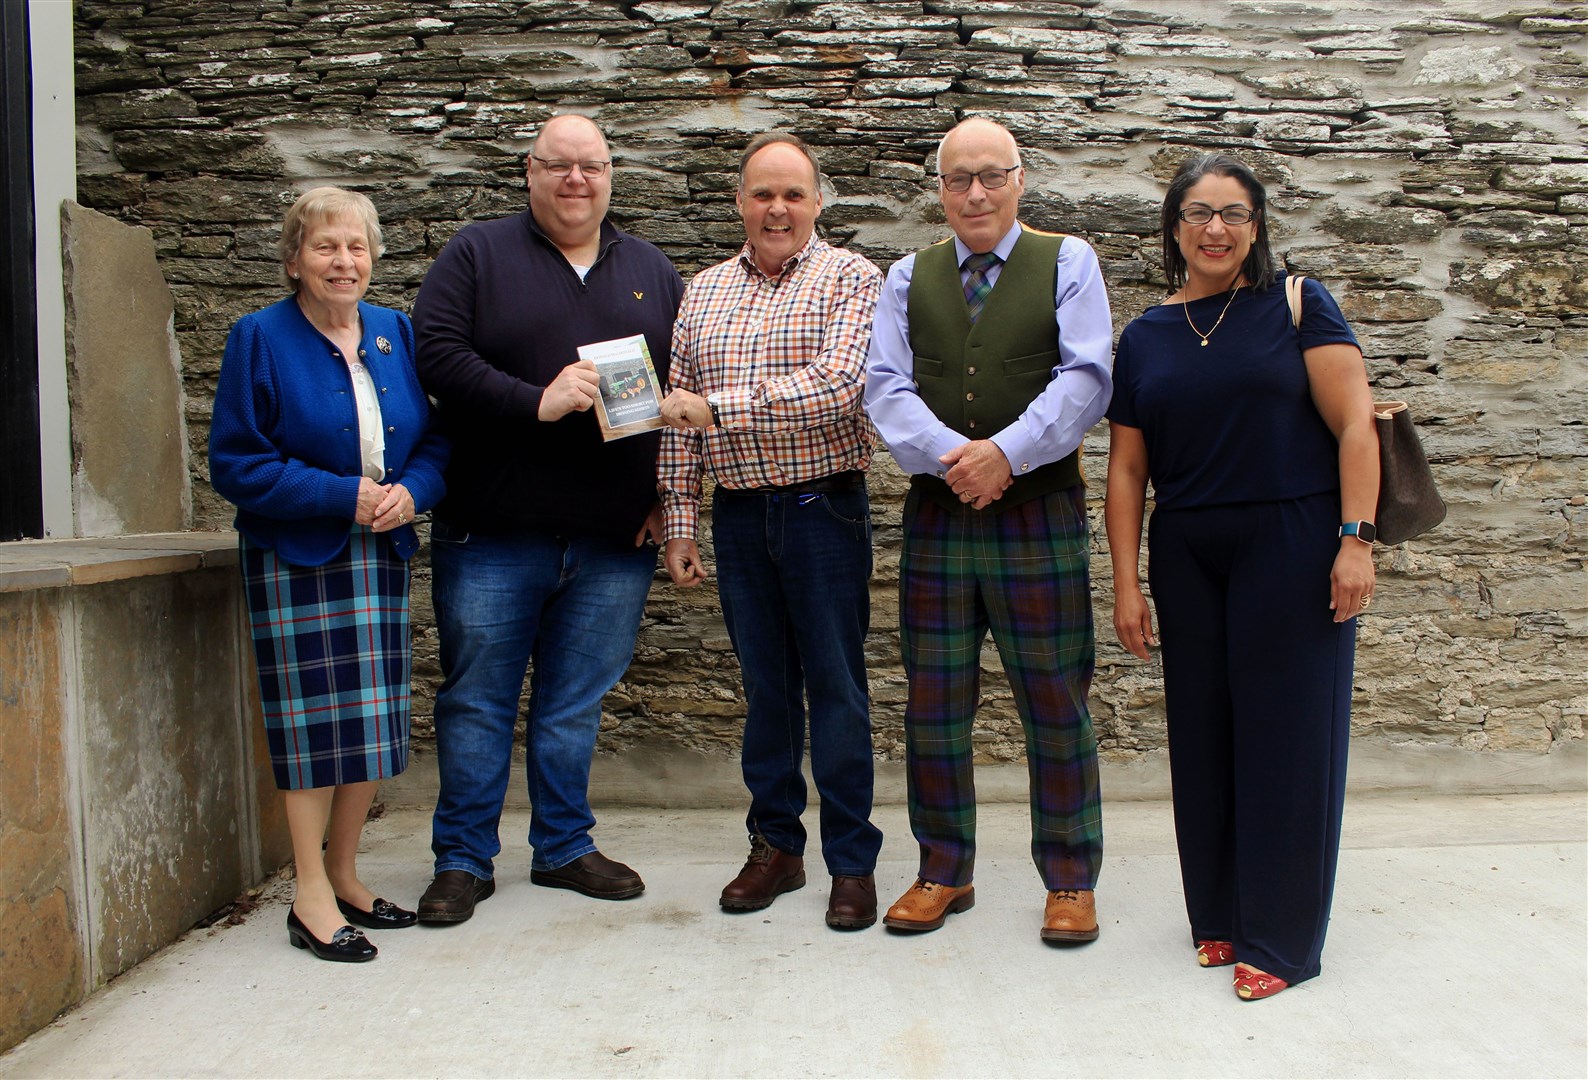 Donald MacDonald (centre) with (from left) Susan Somerset, Calum Adams, Peter Somerset and Elizangela Robertson at the book launch in Thurso. Picture: Alan Hendry